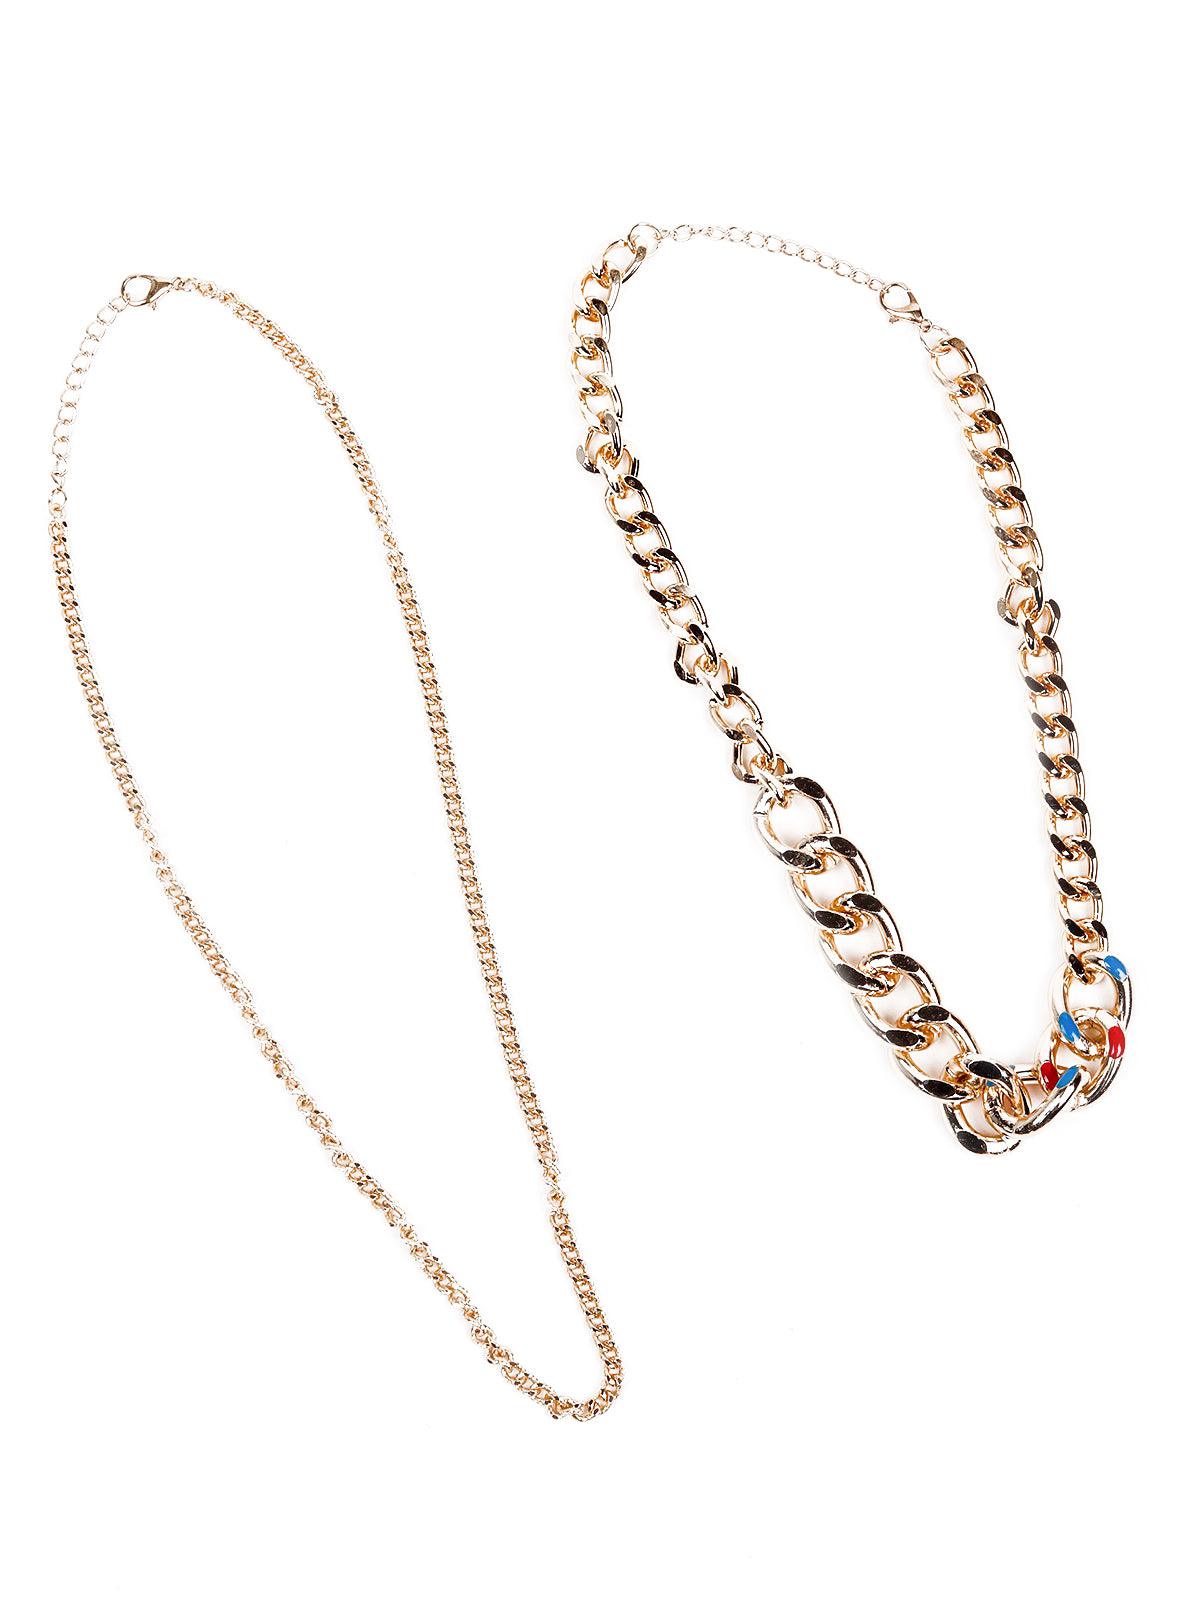 Women's Double Layered Gold-Tone Necklace - Odette